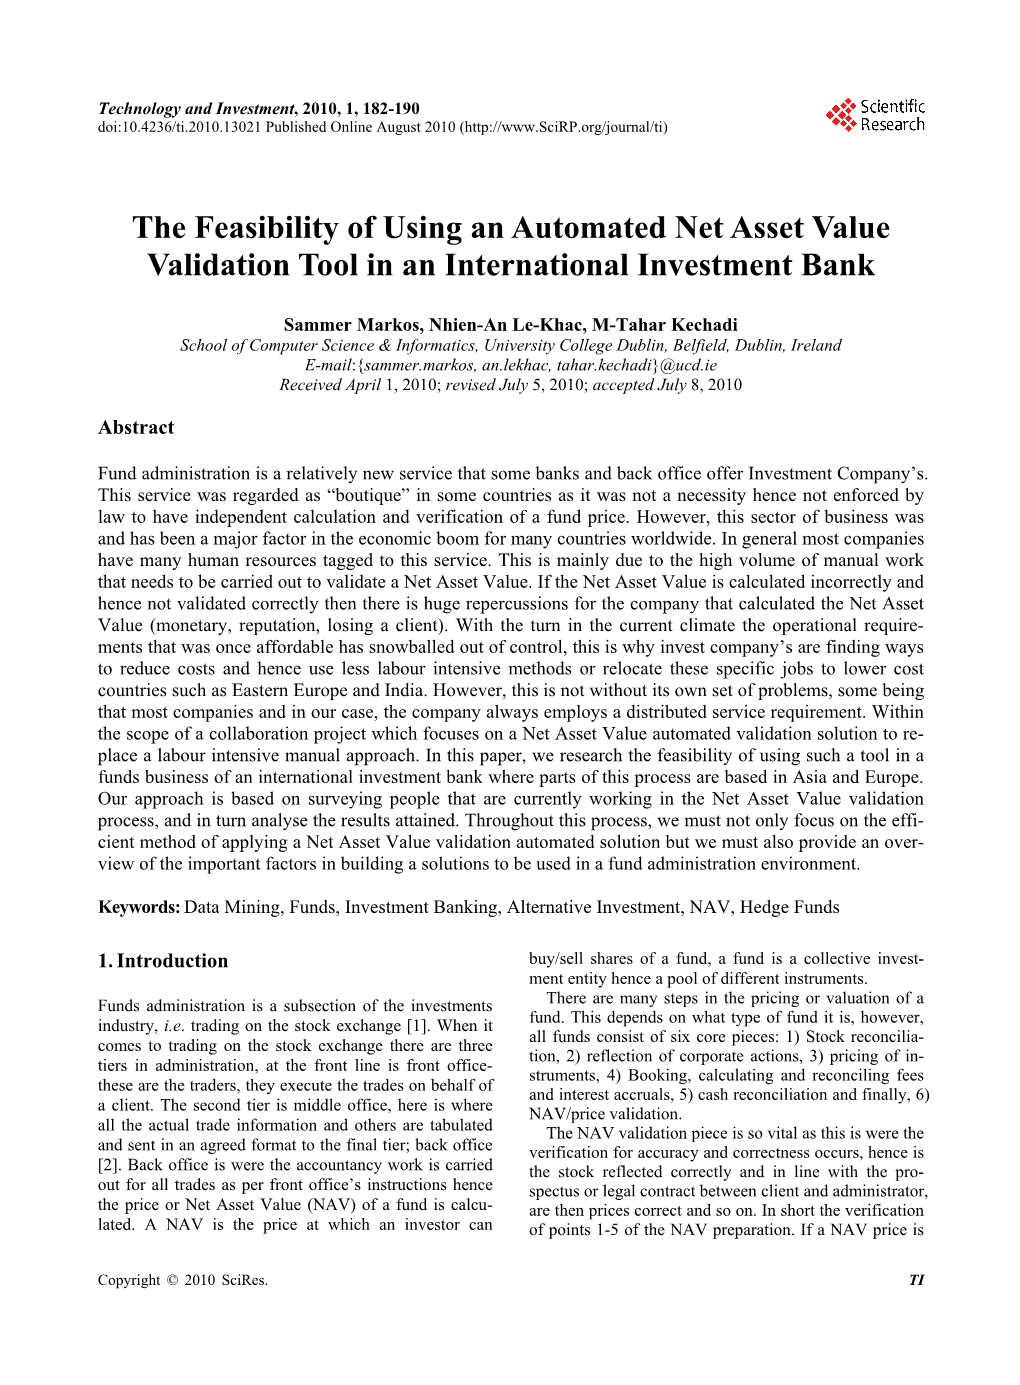 The Feasibility of Using an Automated Net Asset Value Validation Tool in an International Investment Bank